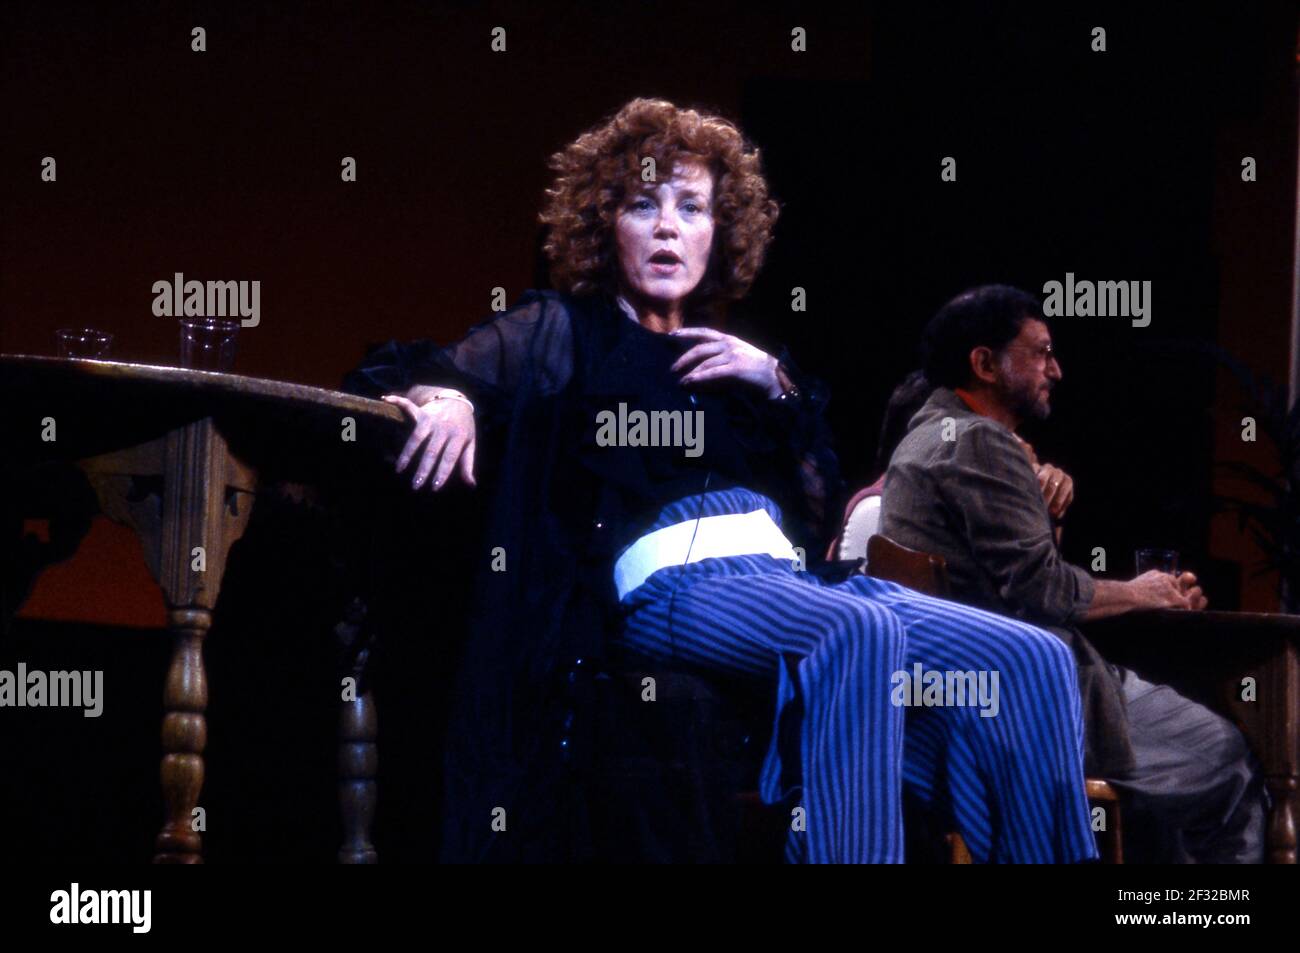 Actress Madeline Kahn rehearsing for a skit for a Comic Relief benefit performance circa 1980s. Kahn is best known for comedic roles in classic Mel Brooks films like Young Frankenstein and Blazing Saddles. Stock Photo